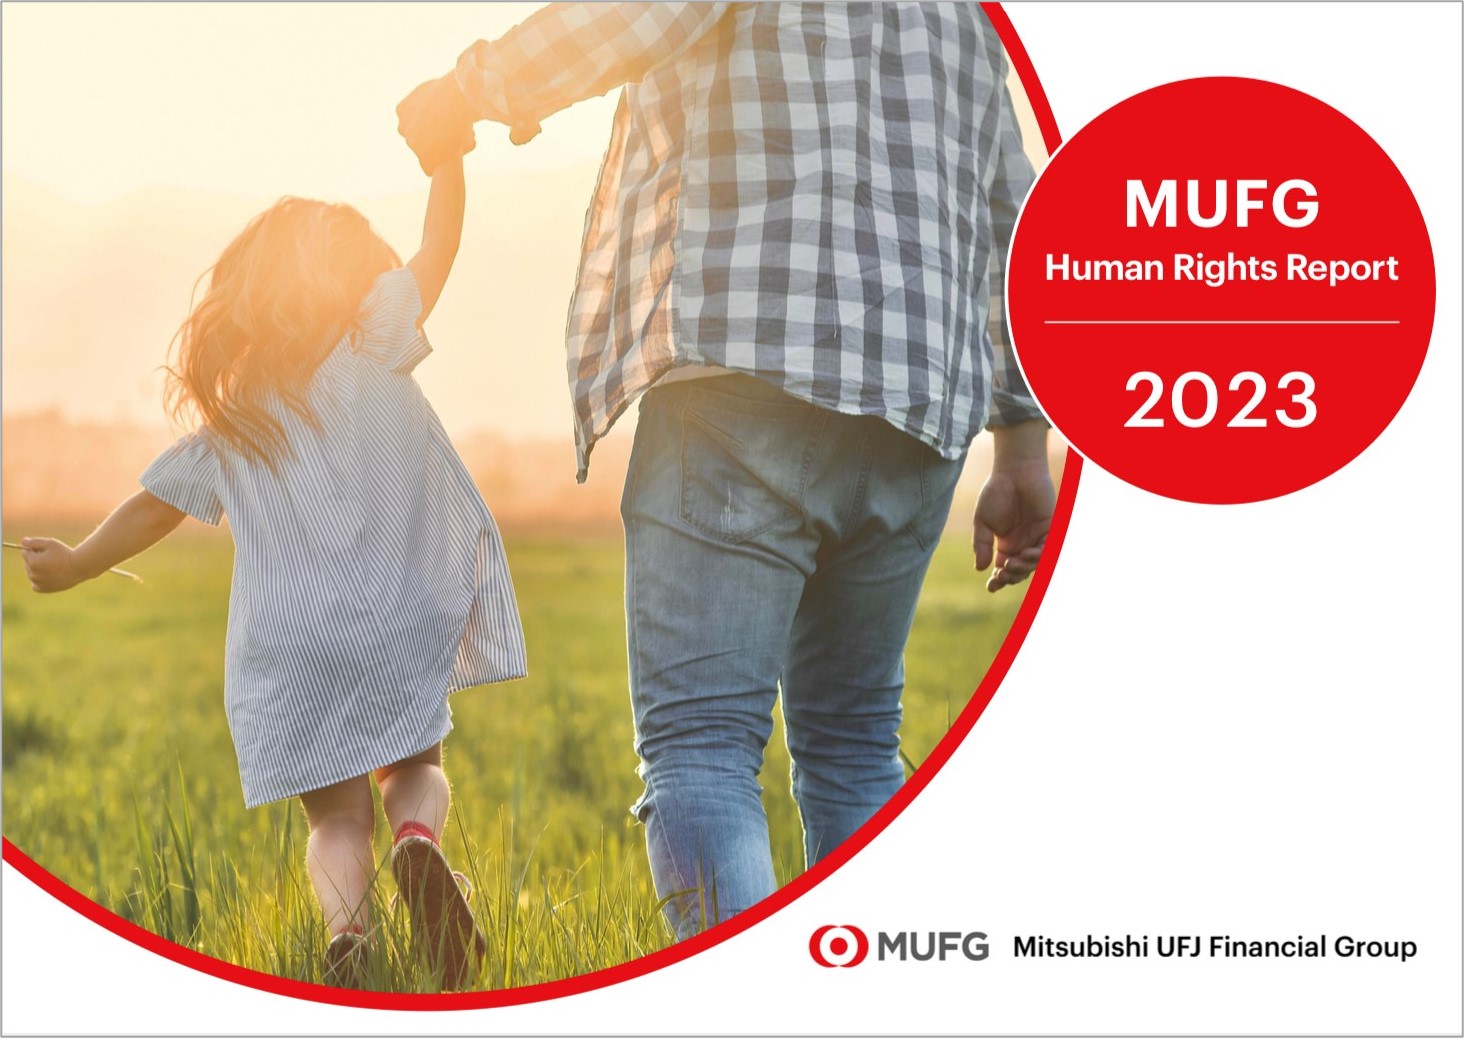 MUFG Human Rights Report 2023